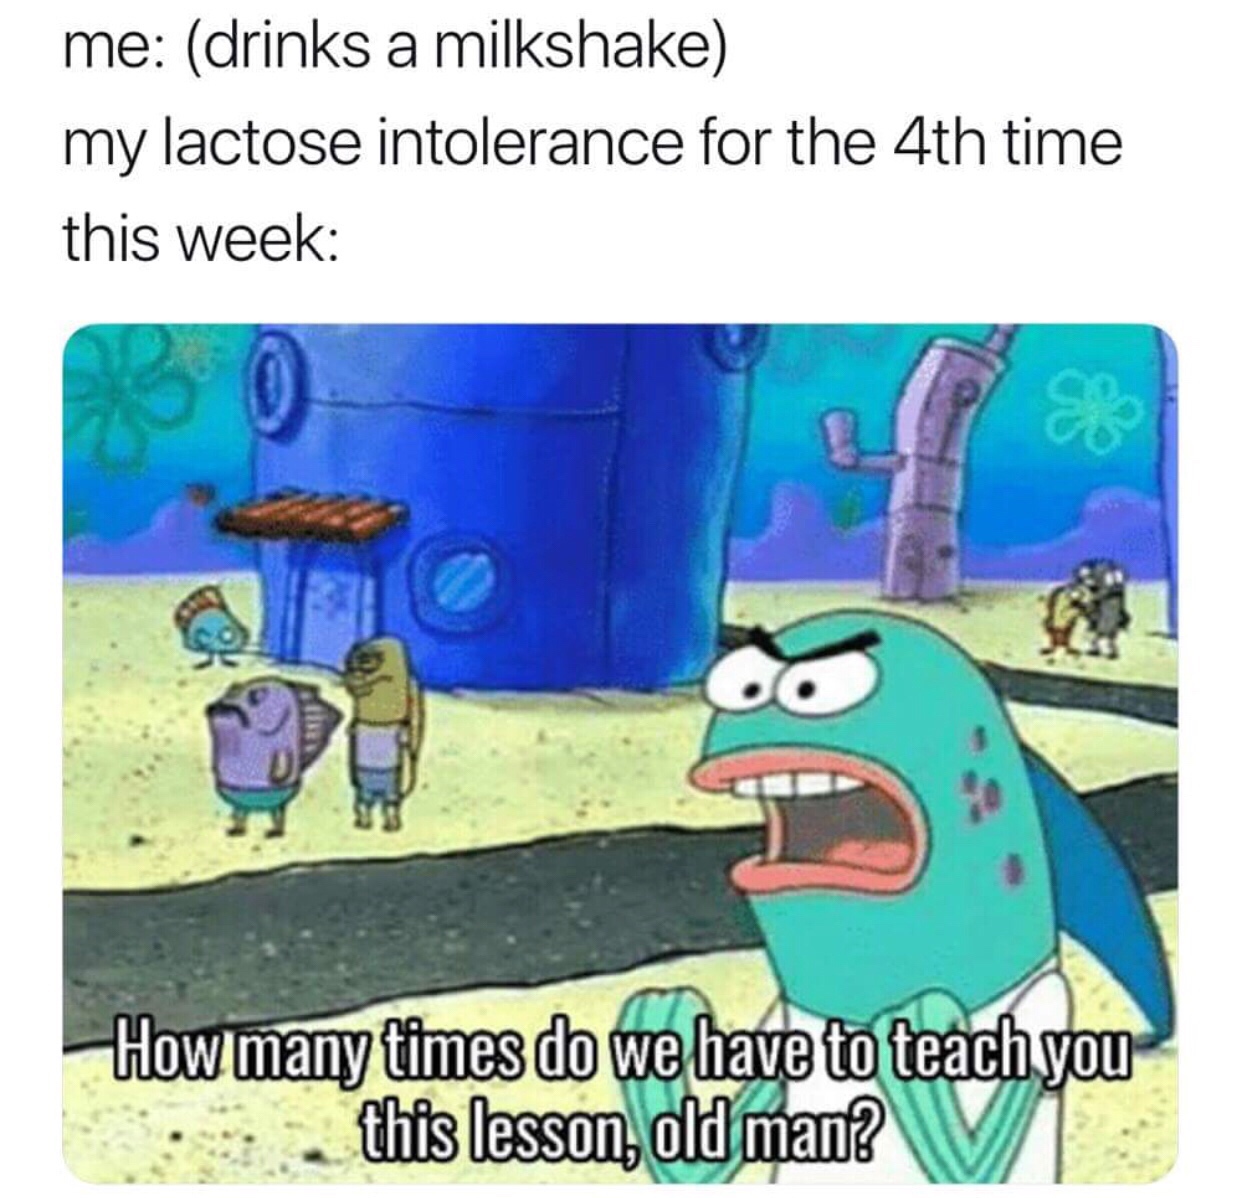 lactose intolerance joke - me drinks a milkshake my lactose intolerance for the 4th time this week E 1300 How many times do we have to teach you this lesson, old man? V